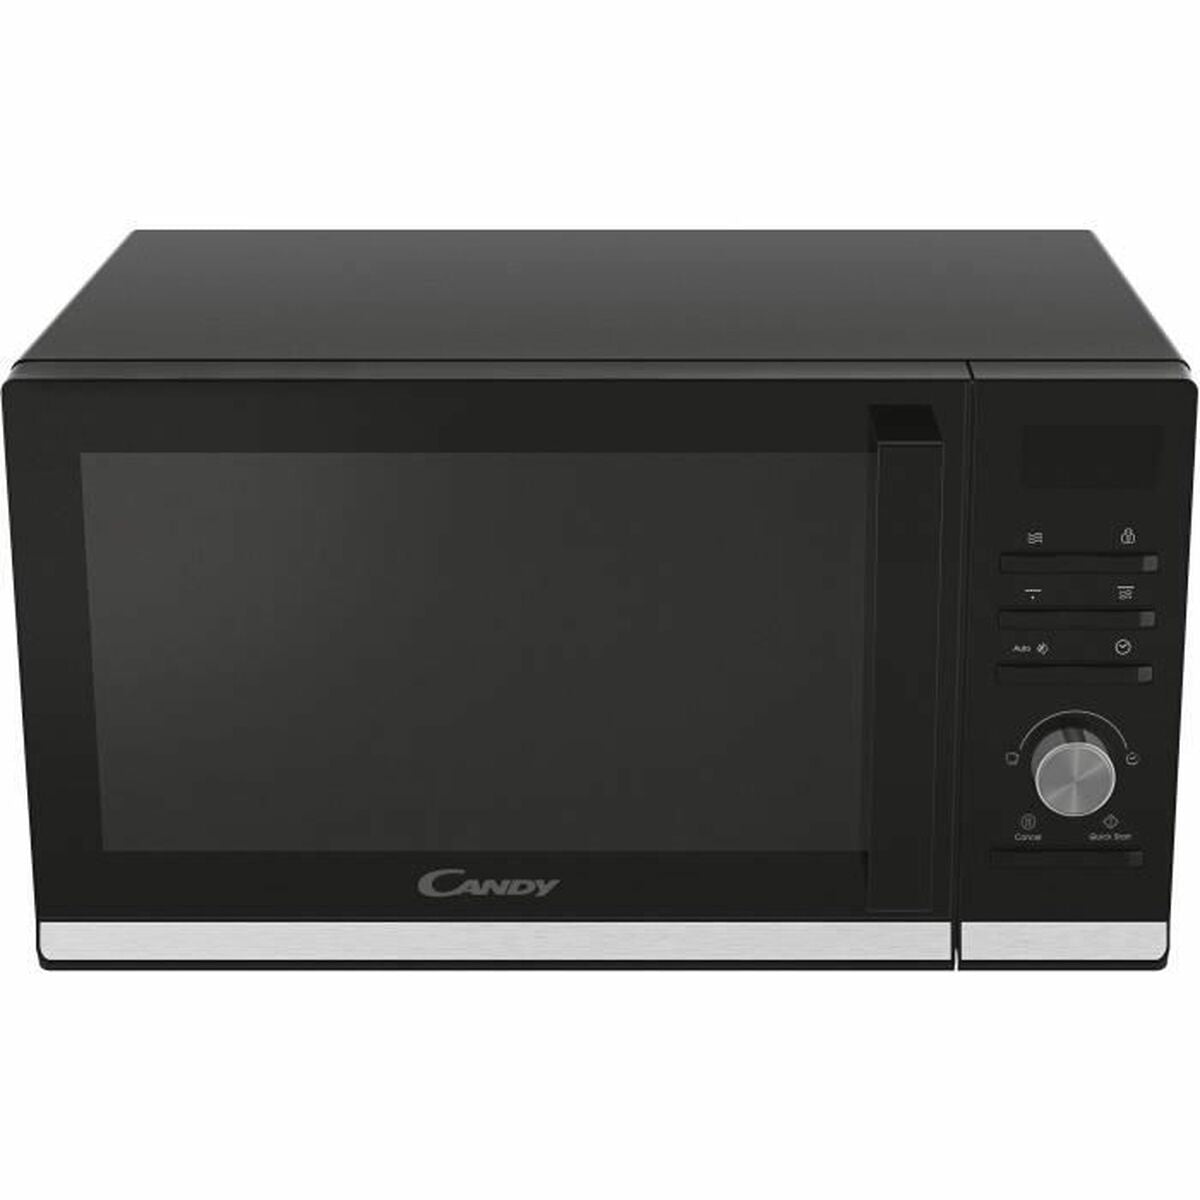 Microwave with Grill Candy Black 700 W 20 L